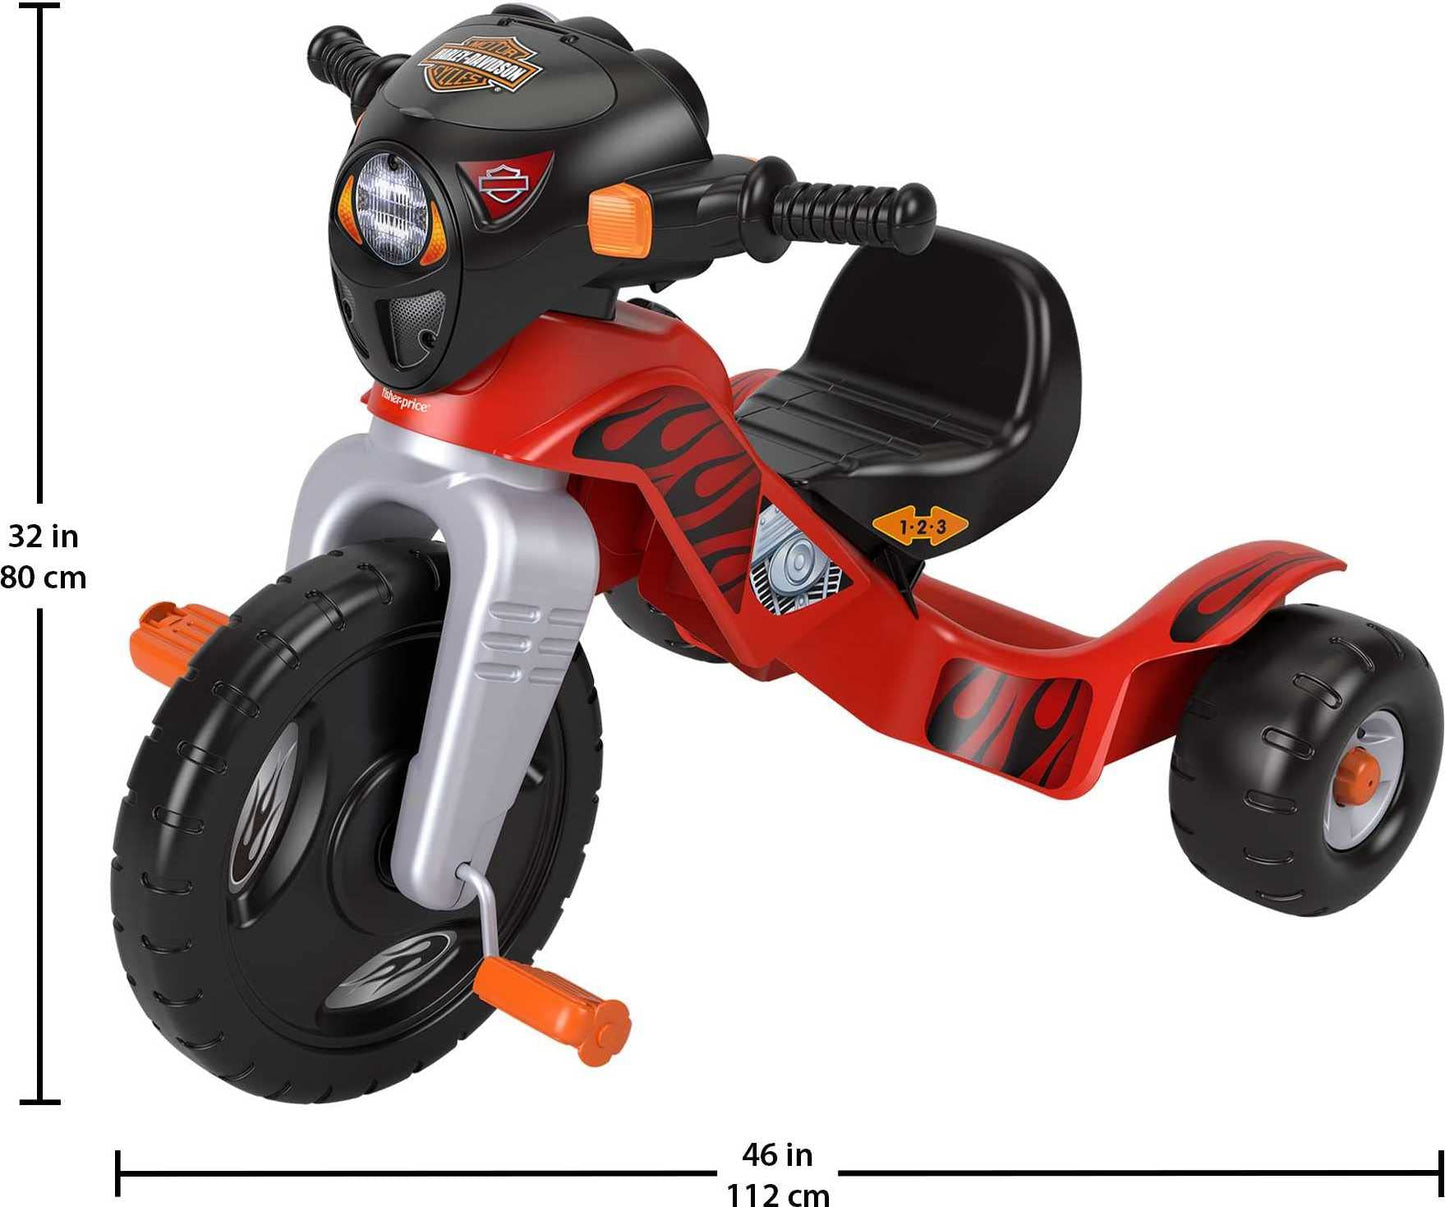 Fisher-Price Harley Davidson Toddler Tricycle Ride-On Preschool Toy, Lights & Sounds Trike with Adjustable Seat, Large